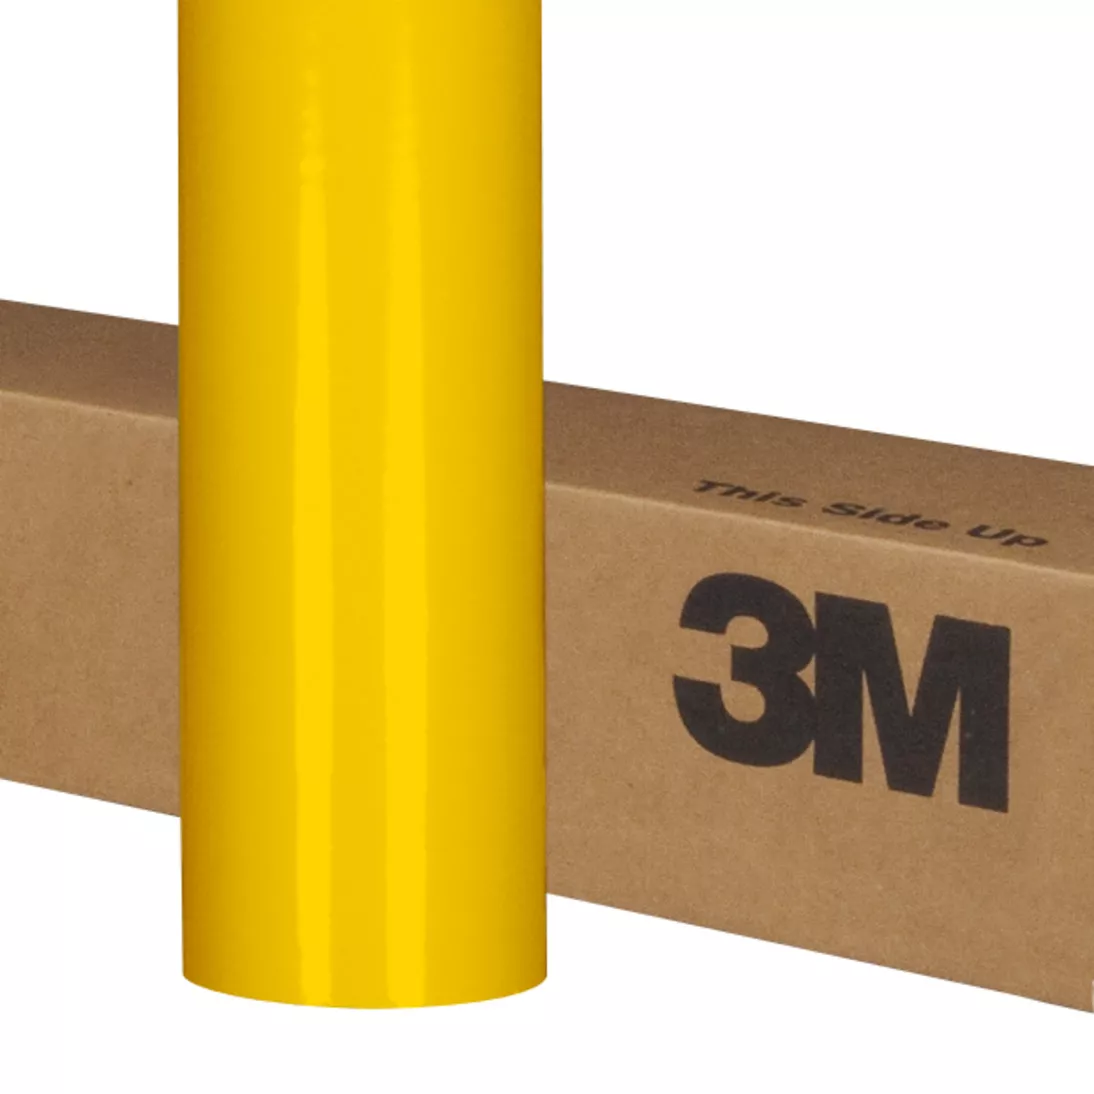 3M™ Envision™ Translucent Film 3730-4365, Yellow, 48 in x 50 yd